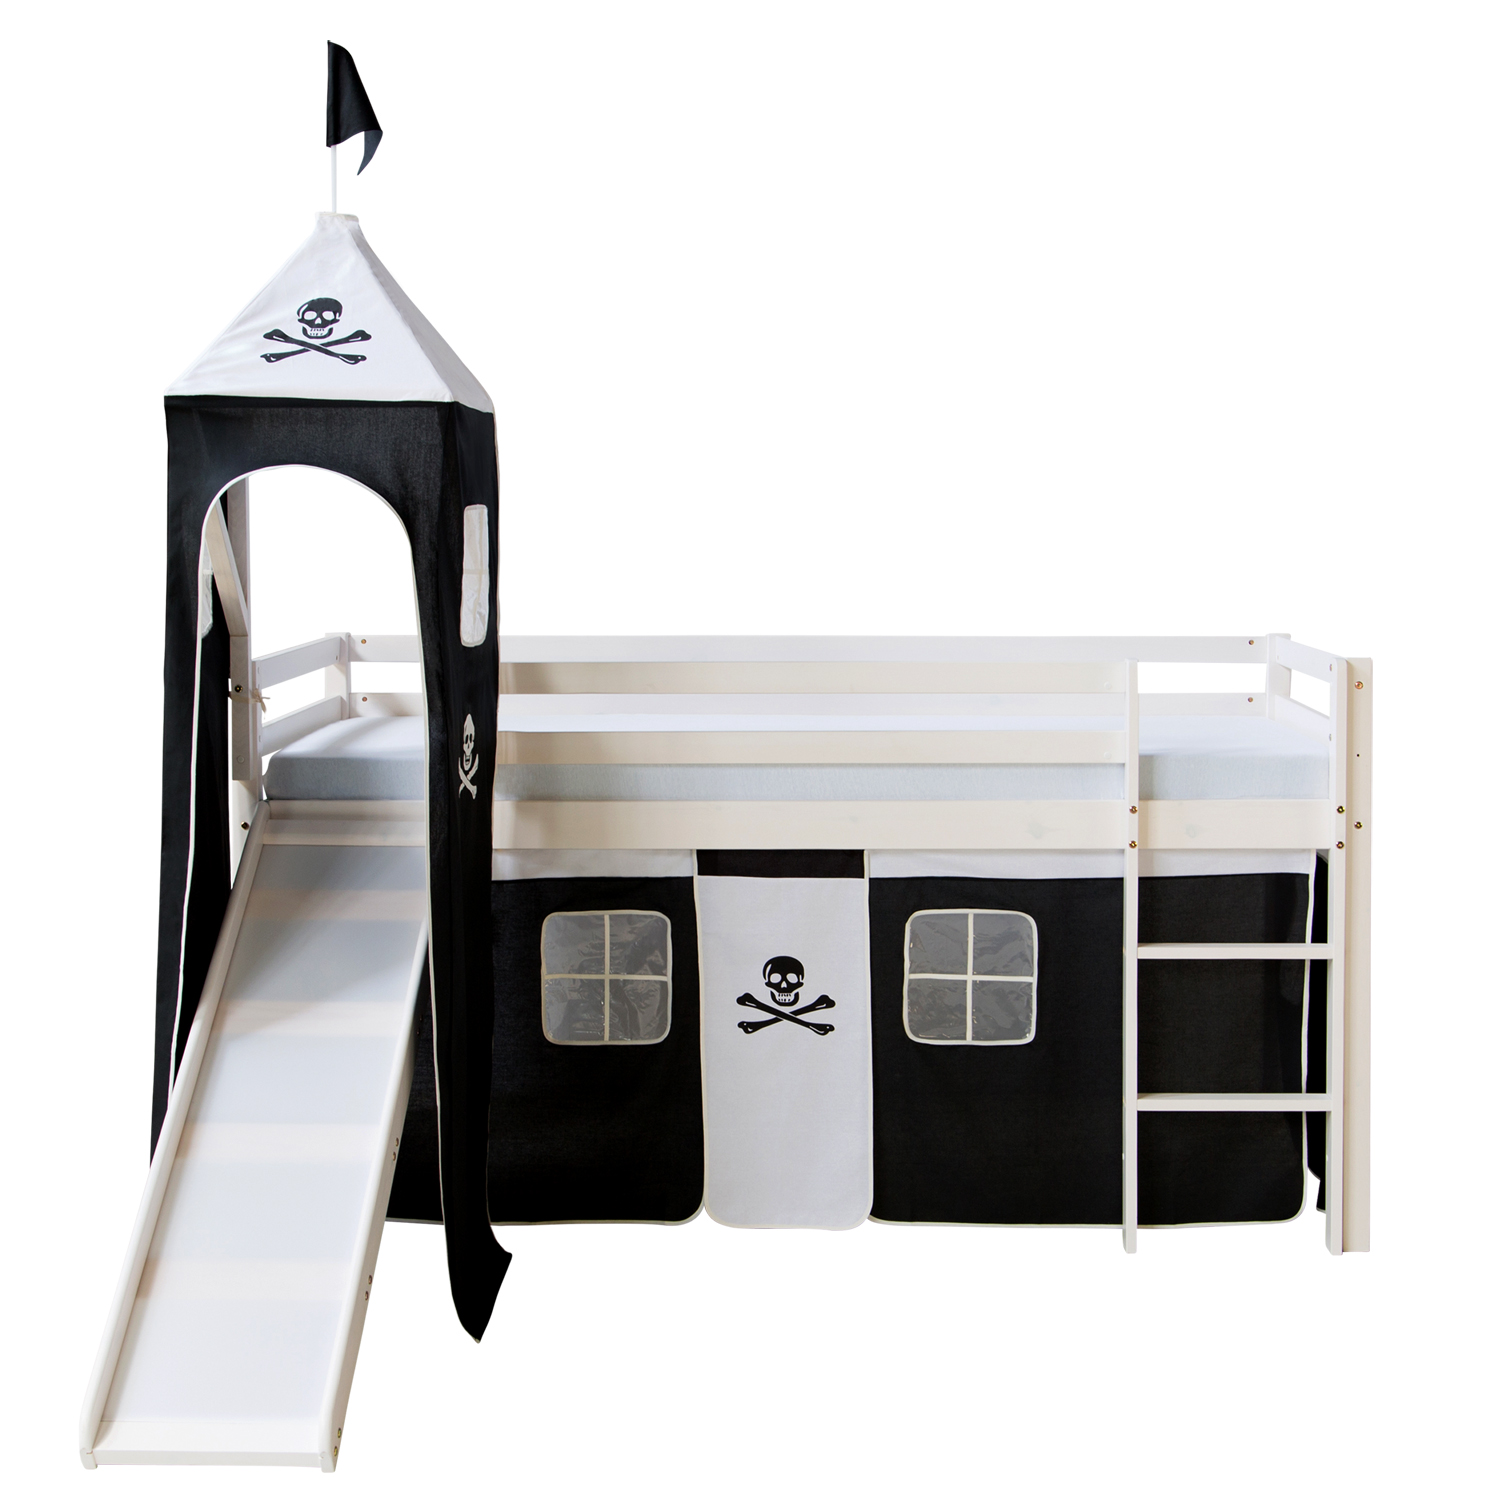 Loftbed Childrenbed Slide Tower Solid Pine Curtain Black Pirate 90x200